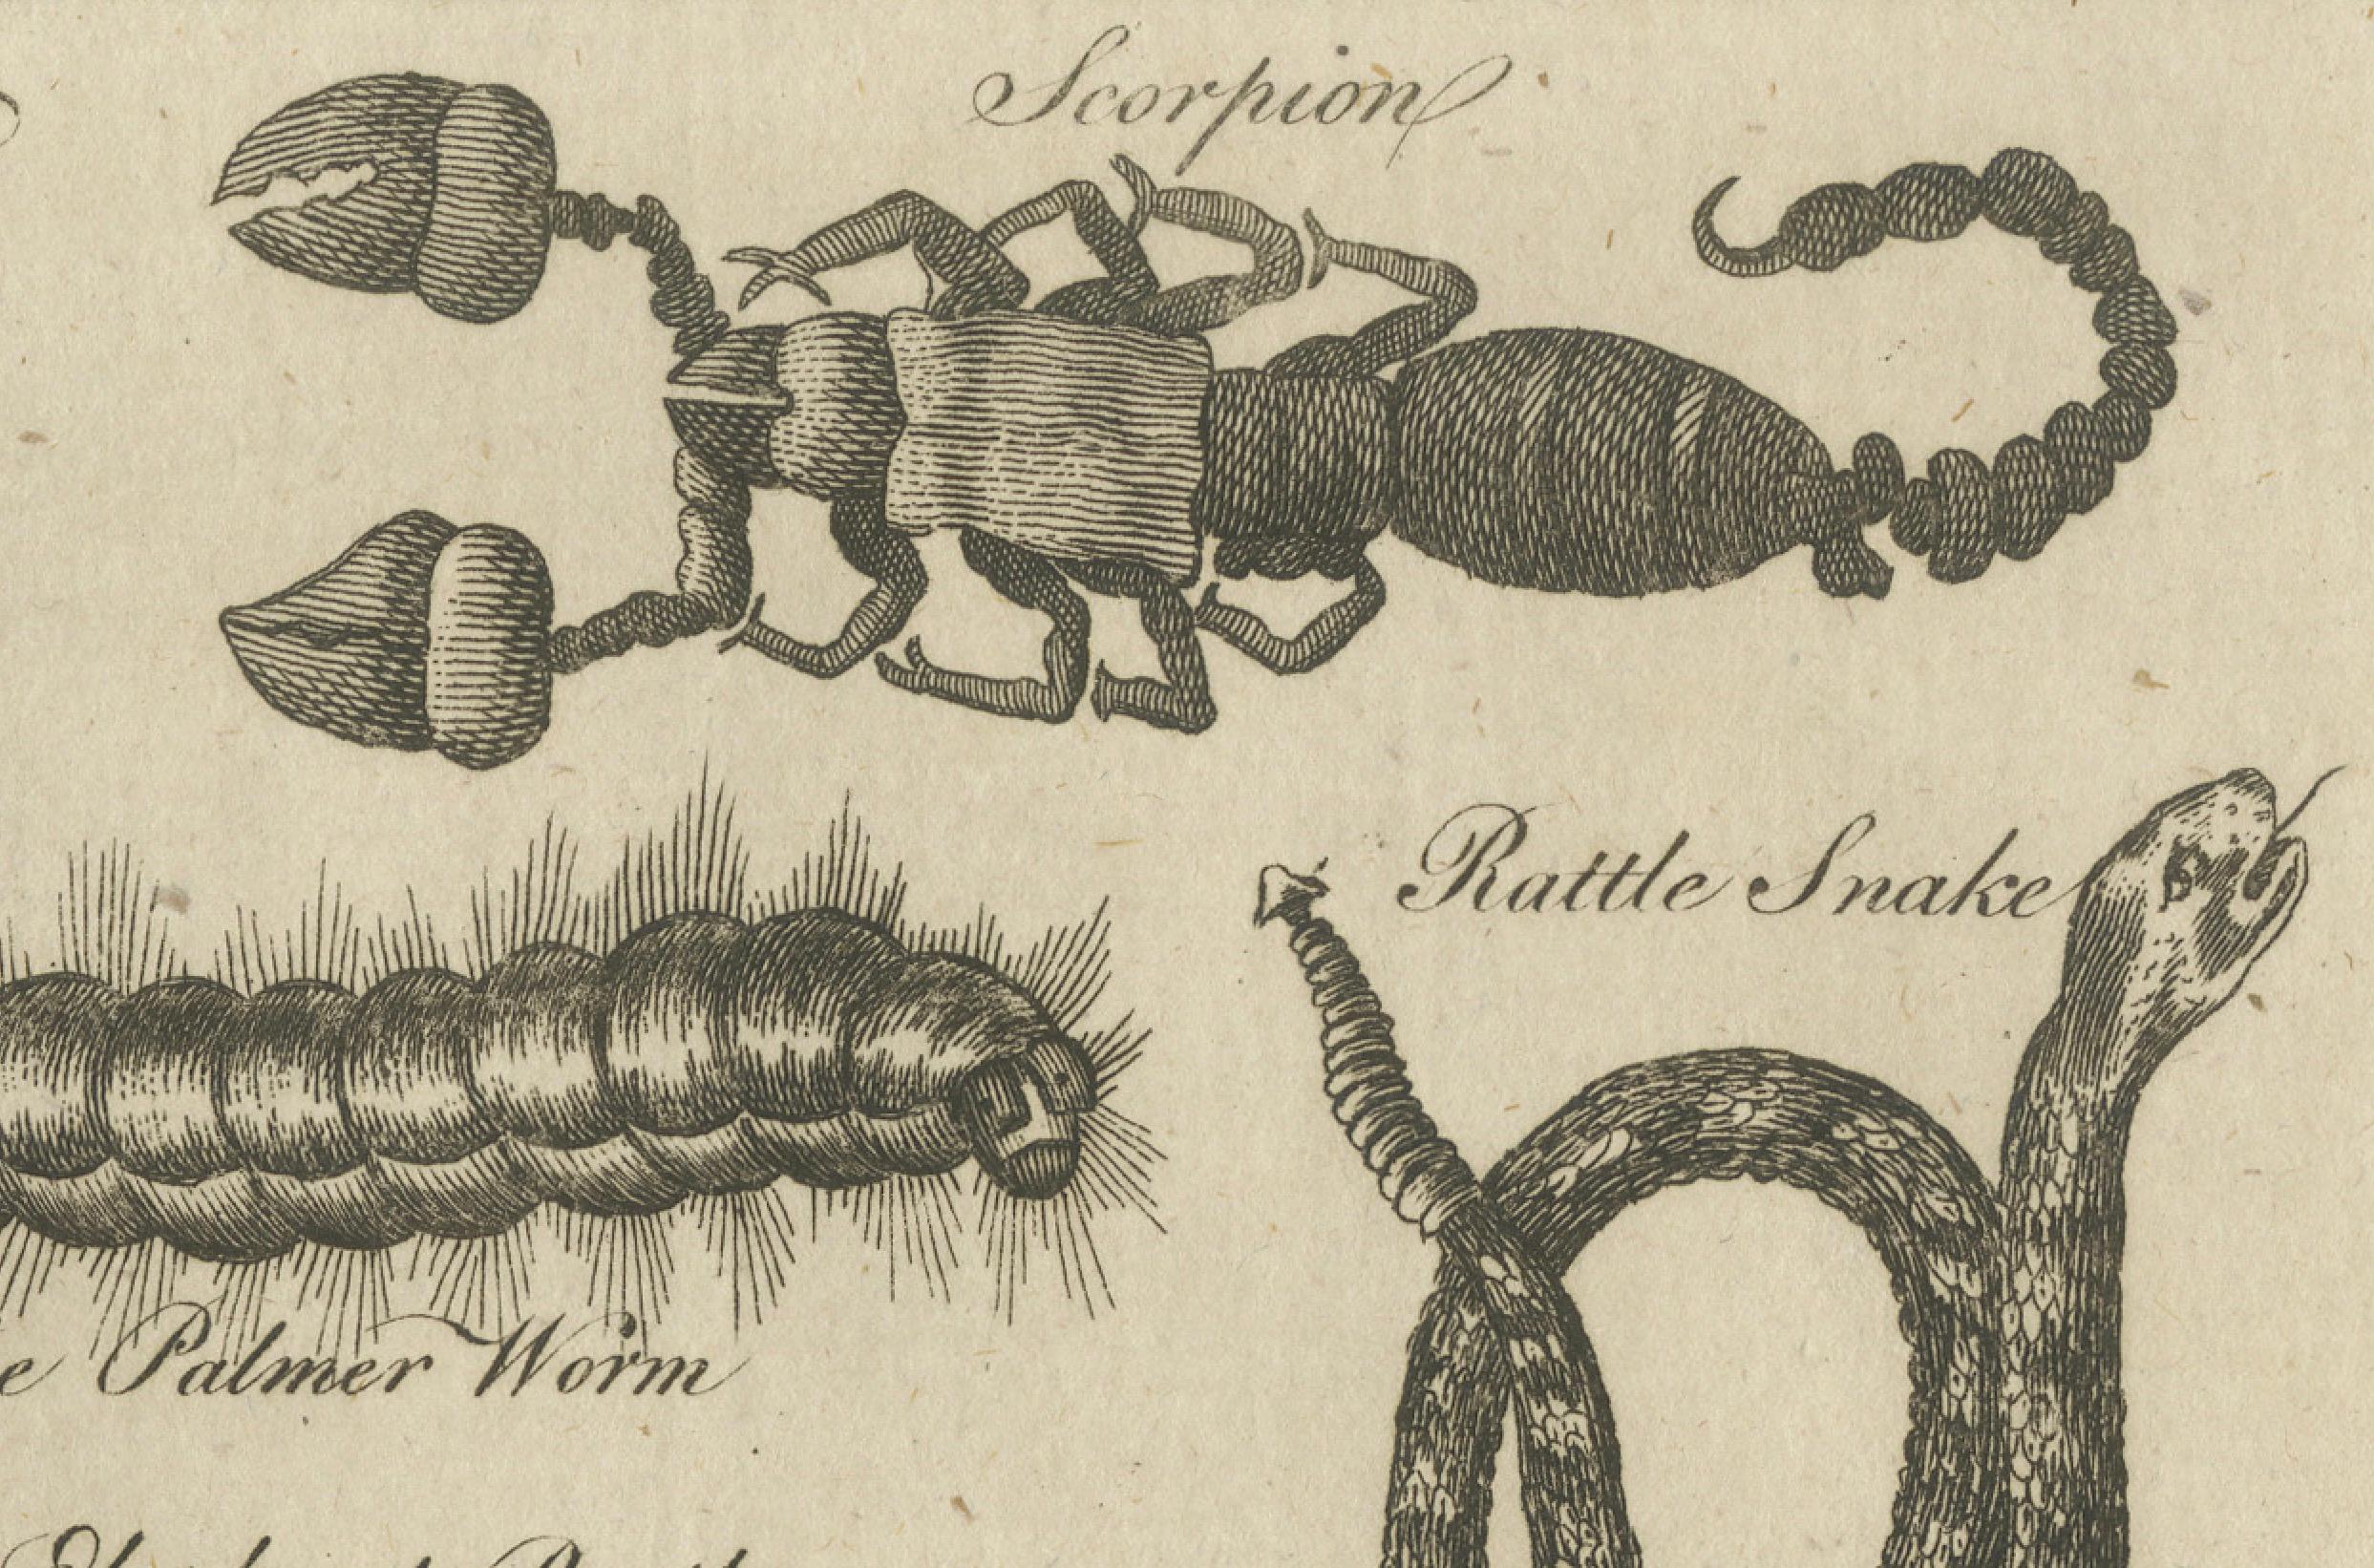 Engraved The Wonders of Nature: Exquisite 18th Century Engravings of Reptiles and Insects For Sale